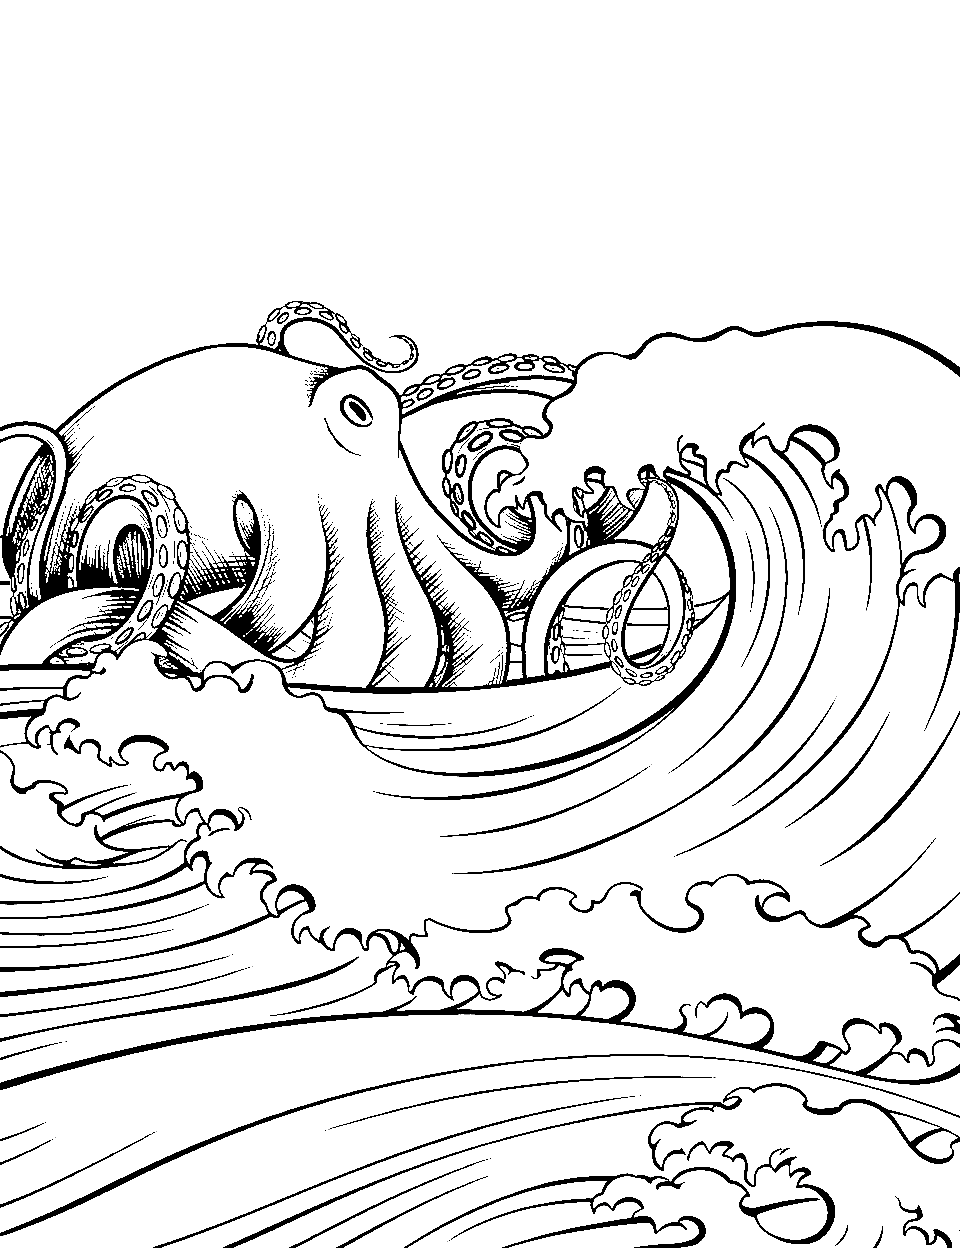 Detailed Kraken Emerging from the Sea Monster Coloring Page - A large, detailed kraken with tentacles rising from the ocean waves.